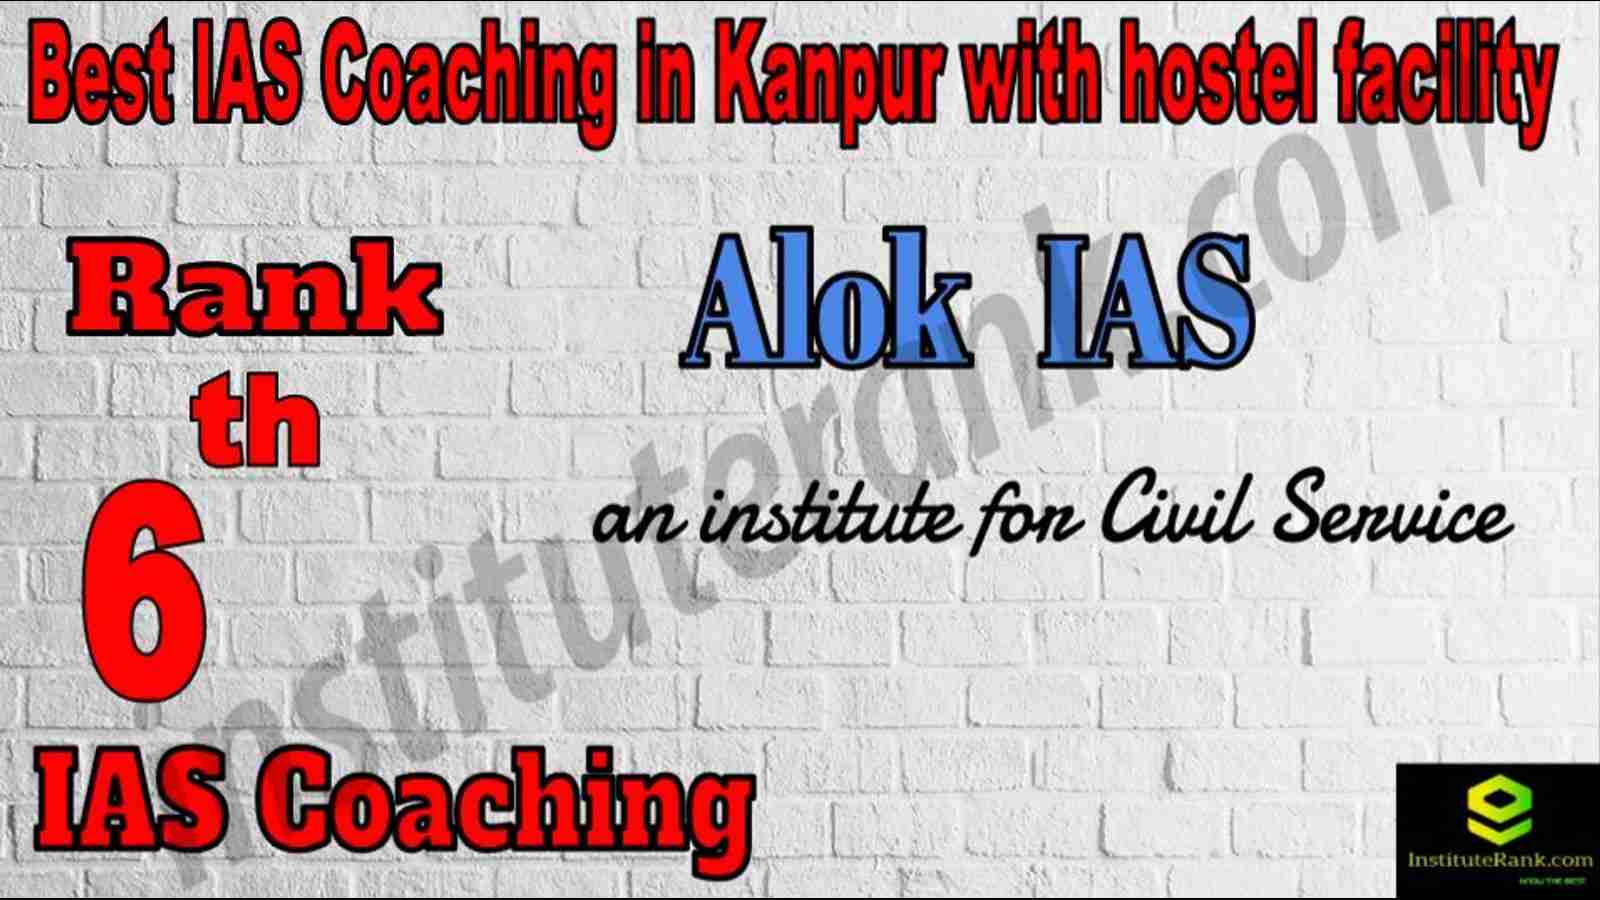 6th Best IAS Coaching in Kanpur with hostel facility